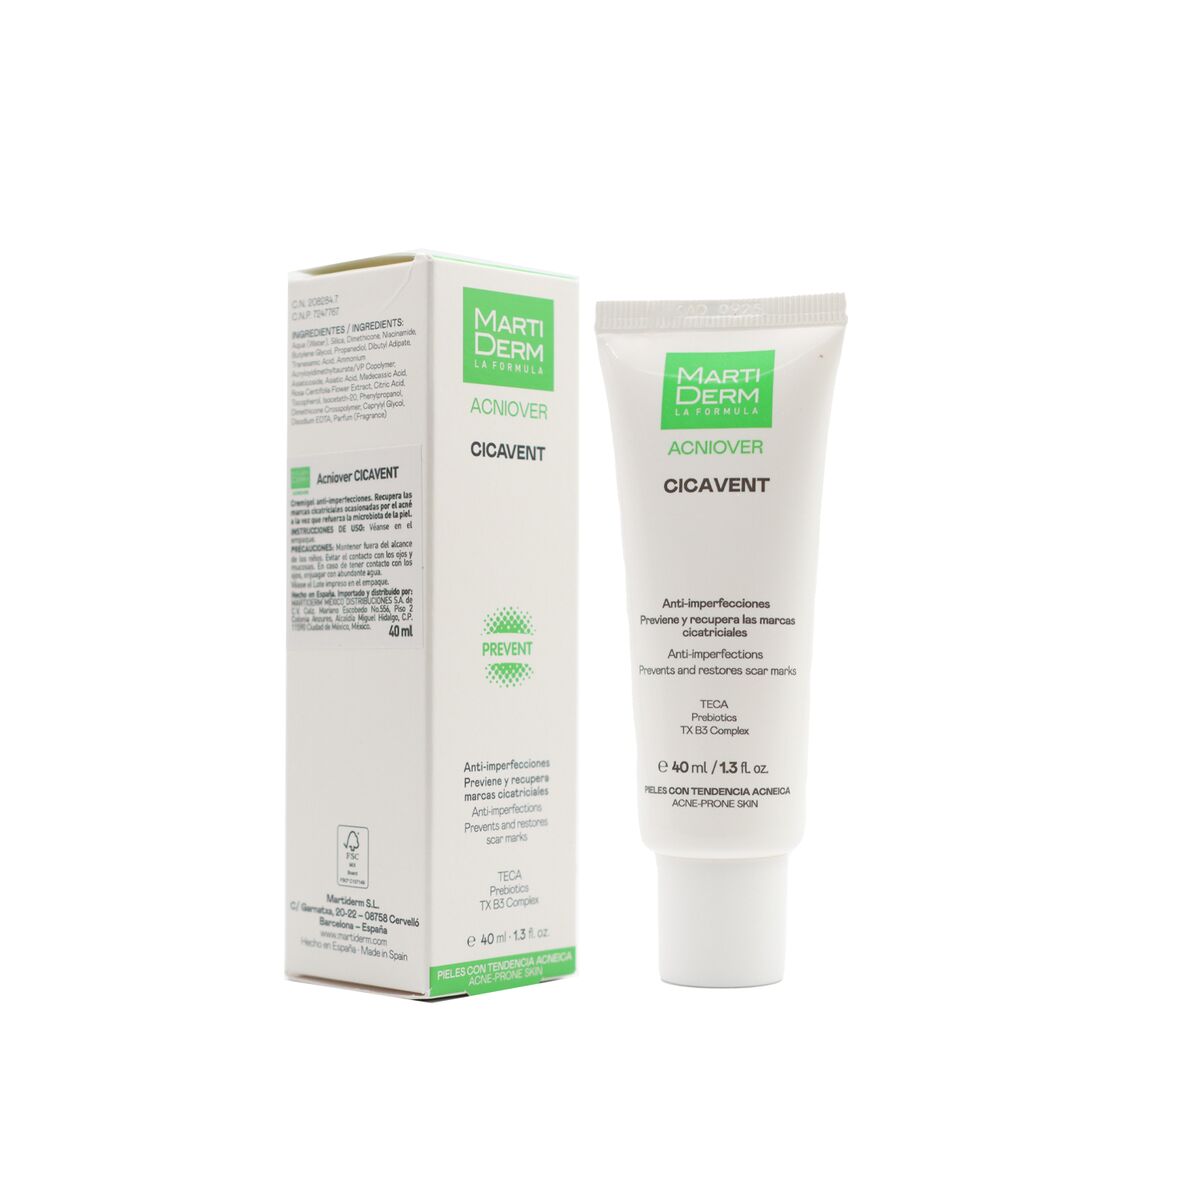 Anti-imperfection Treatment Martiderm Acniover Cicavent 40 ml